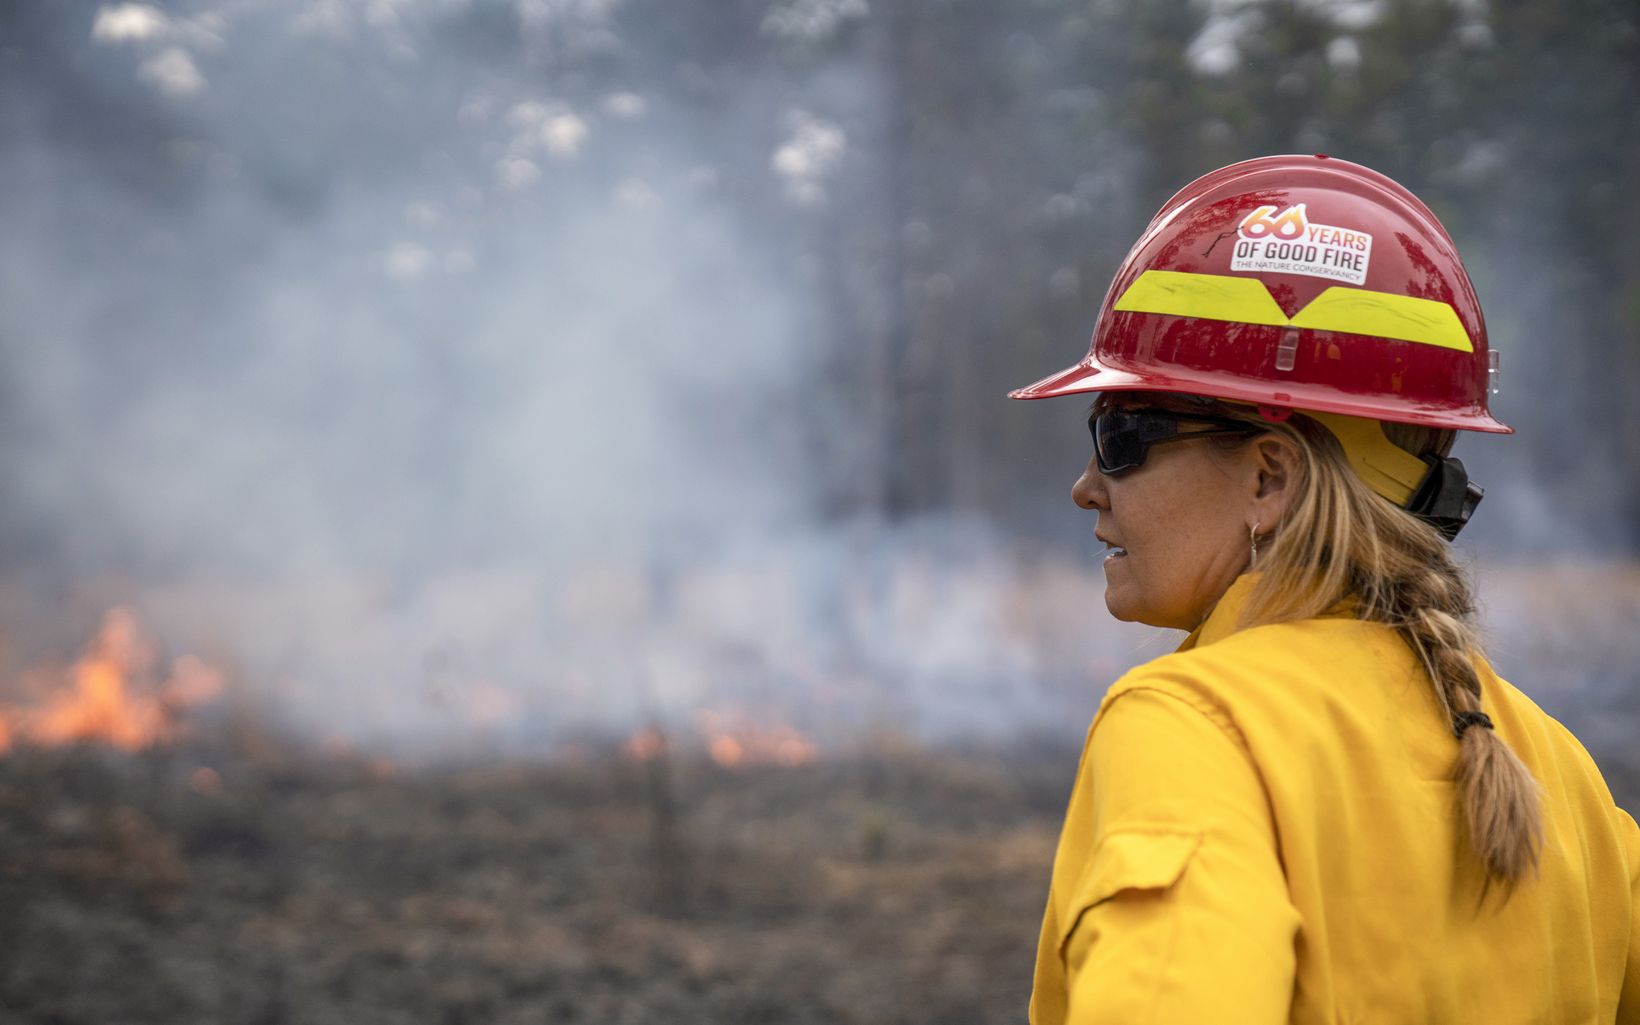 USE MORE GOOD FIRE Through partnership, we are significantly increasing the use of prescribed burns to restore forests and prevent catastrophic wildfires. © Lexey Swall